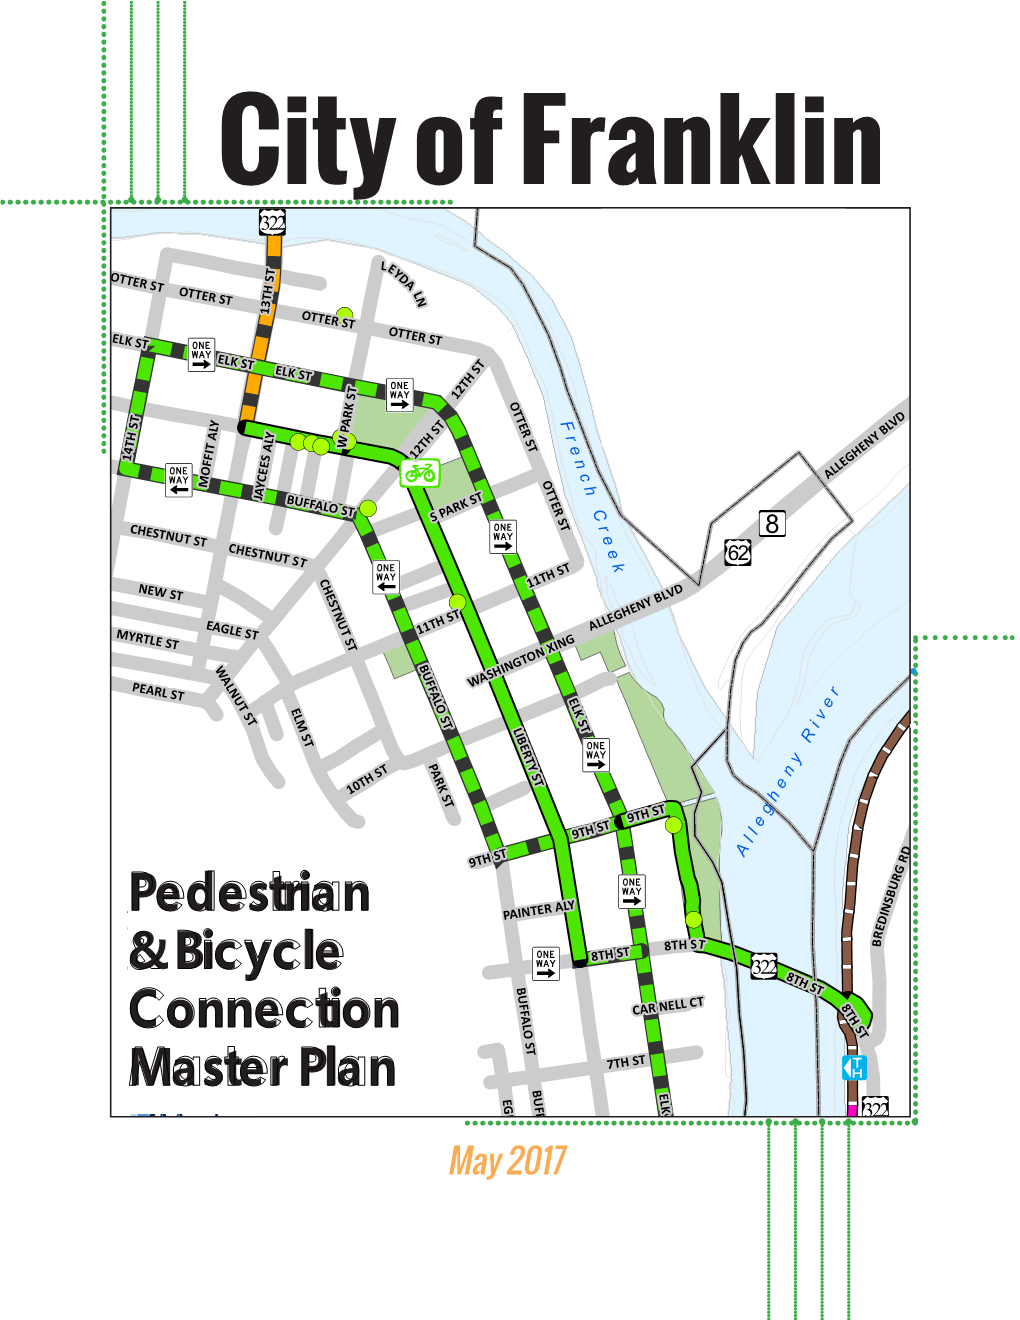 2017 City of Franklin Pedestrian & Bicycle Connection Master Plan